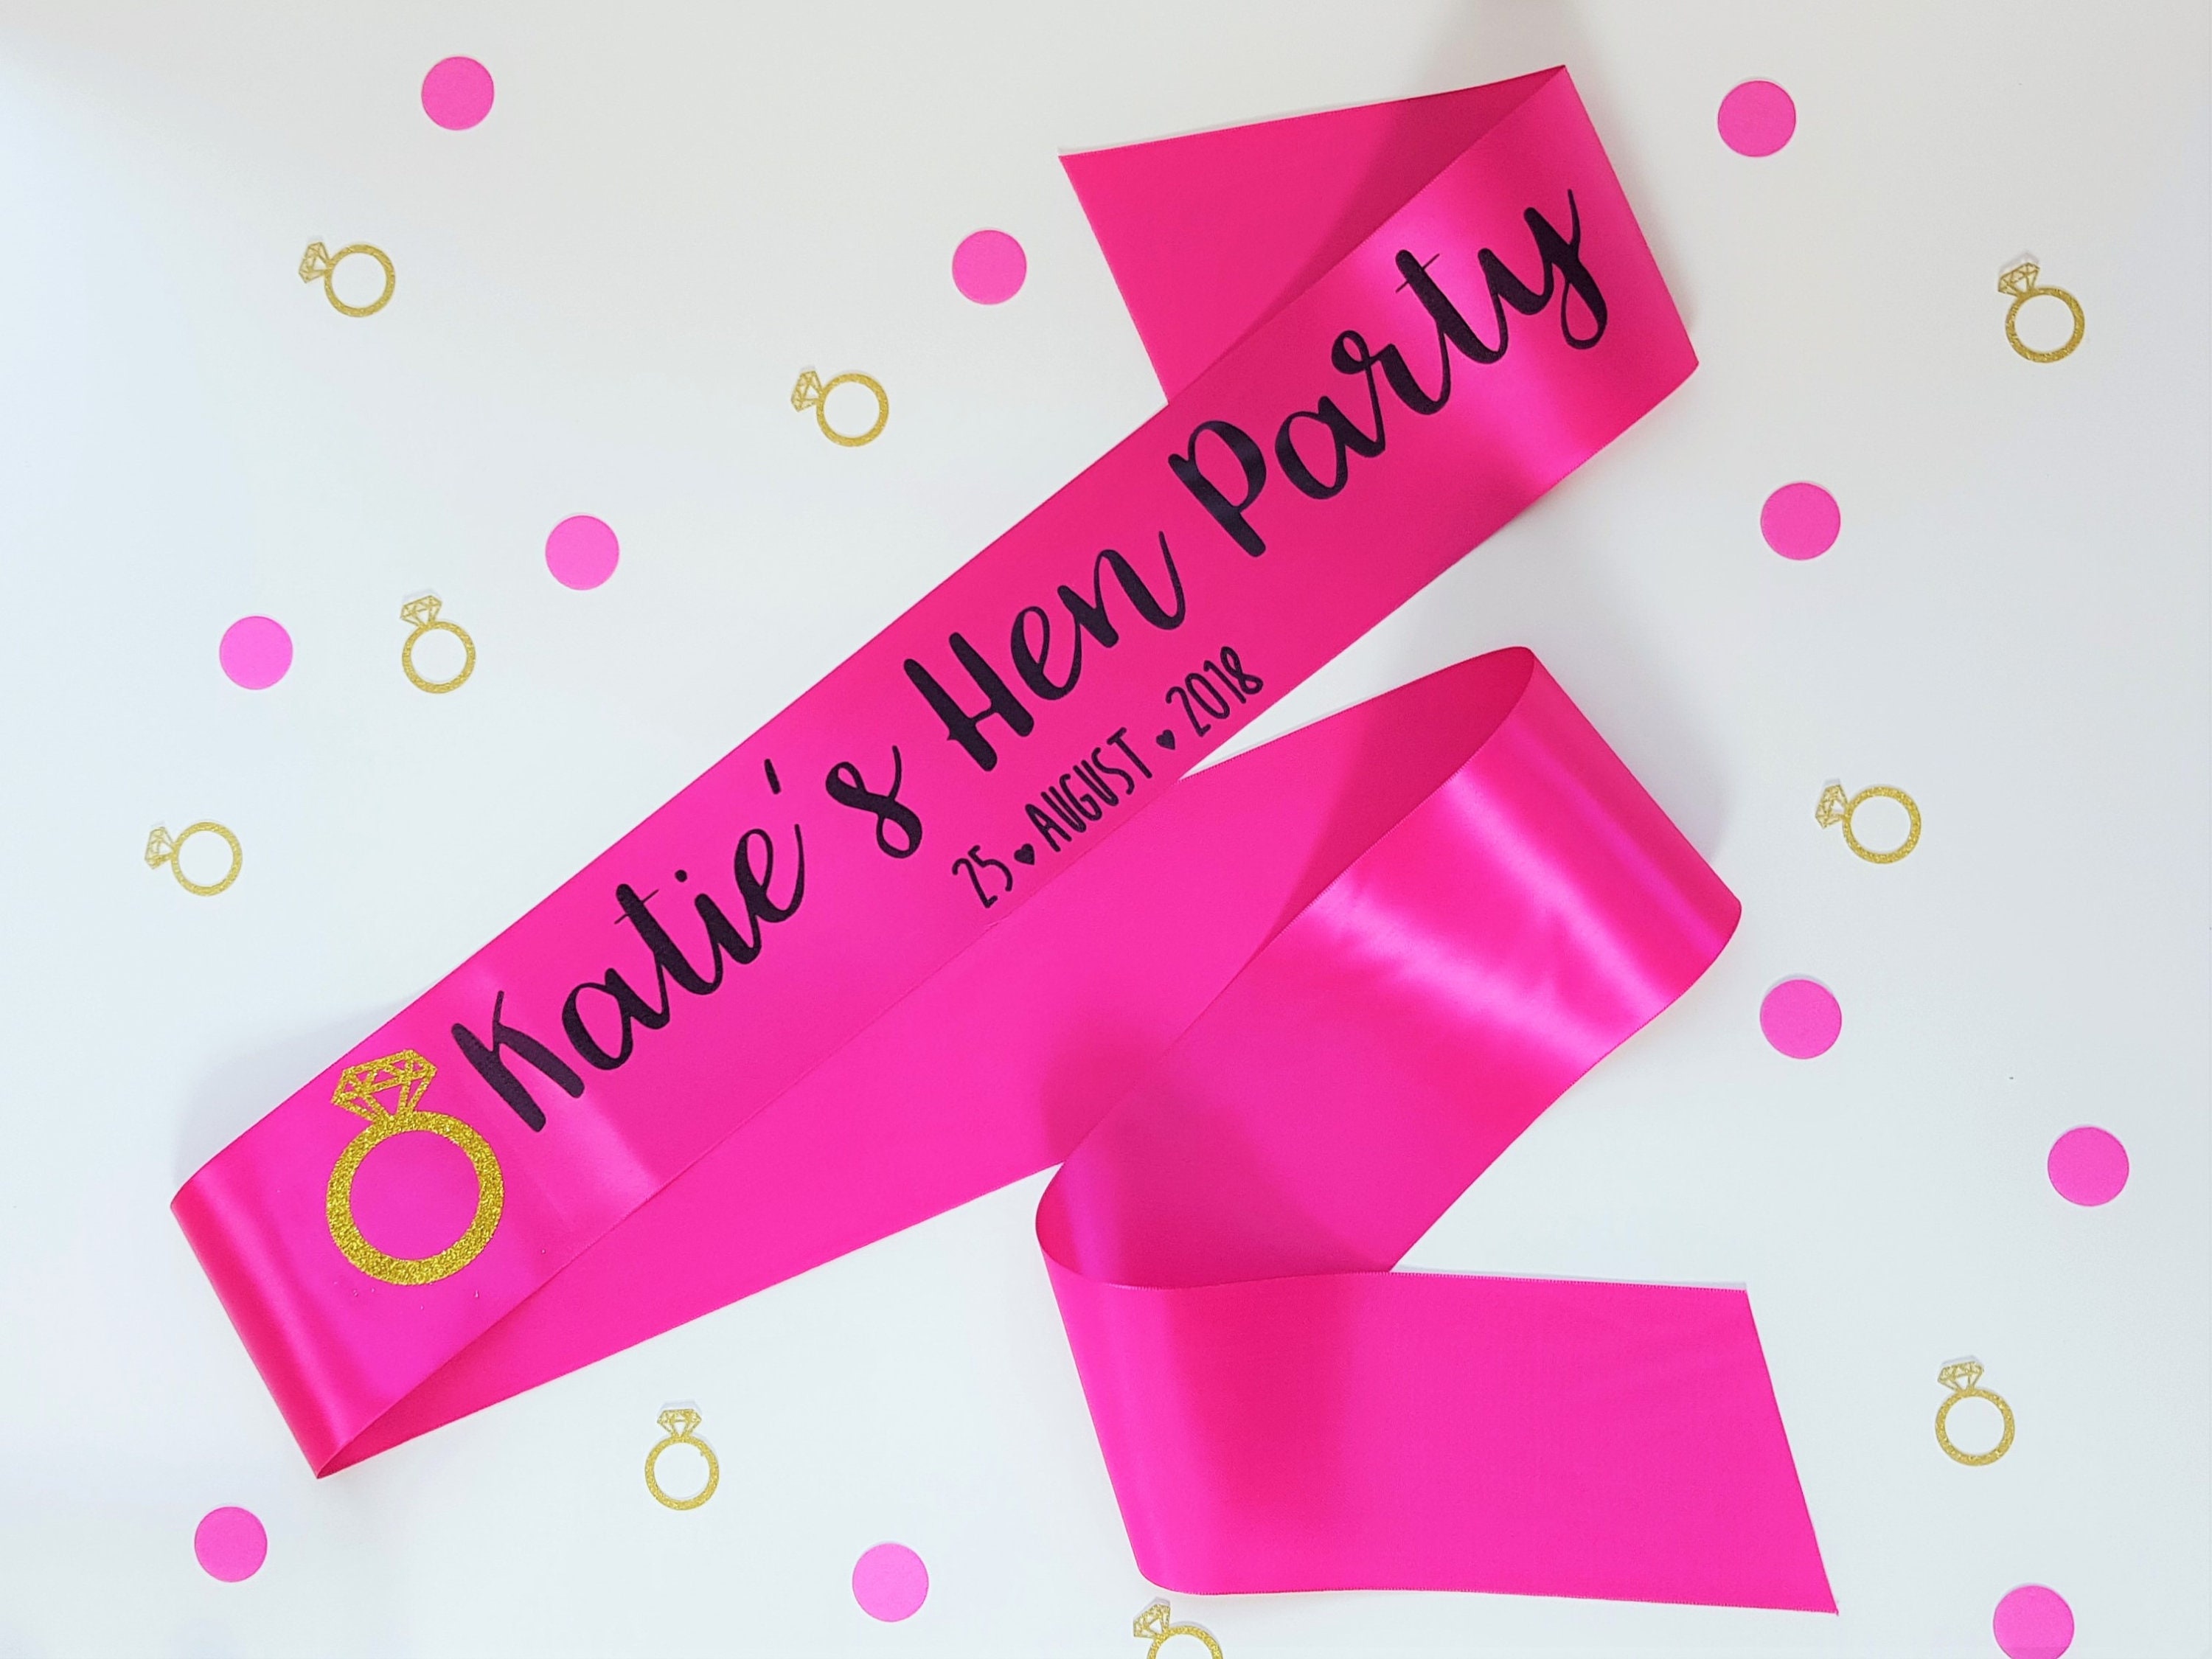 PERSONALISED HEN PARTY SASHES NIGHT DO SASH CHEAP ACCESSORIES BRIDE TO BE New